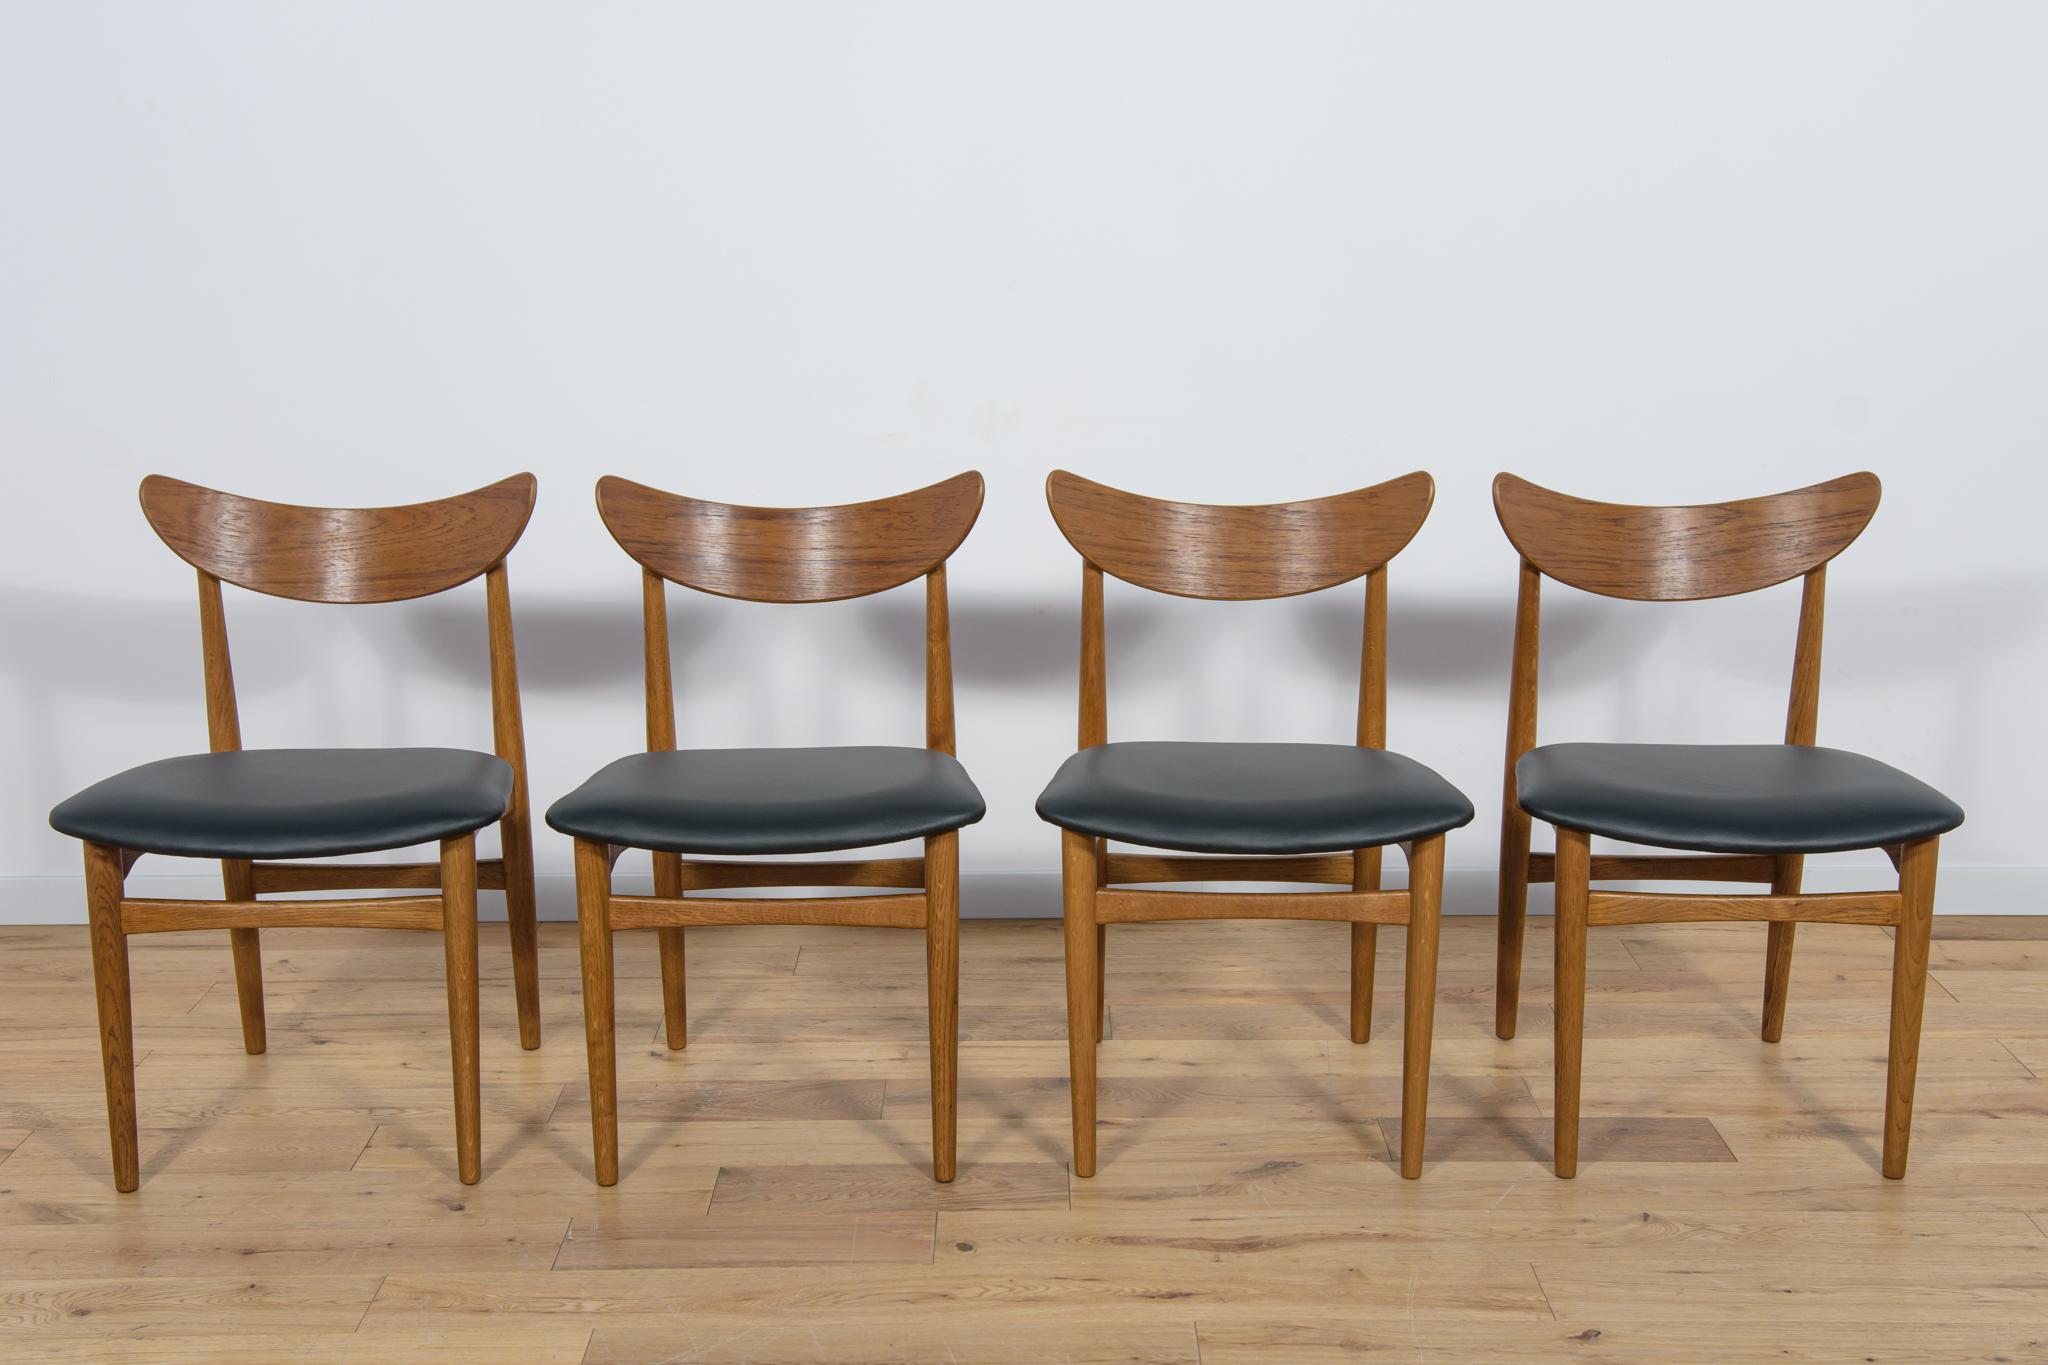 A set of four chairs produced in Denmark in the 1960s. Chairs with an interesting, light form, with a profiled backrest. The chair frame is made of oak wood, the backrest is veneered with teak. The furniture has been thoroughly renovated, cleaned of